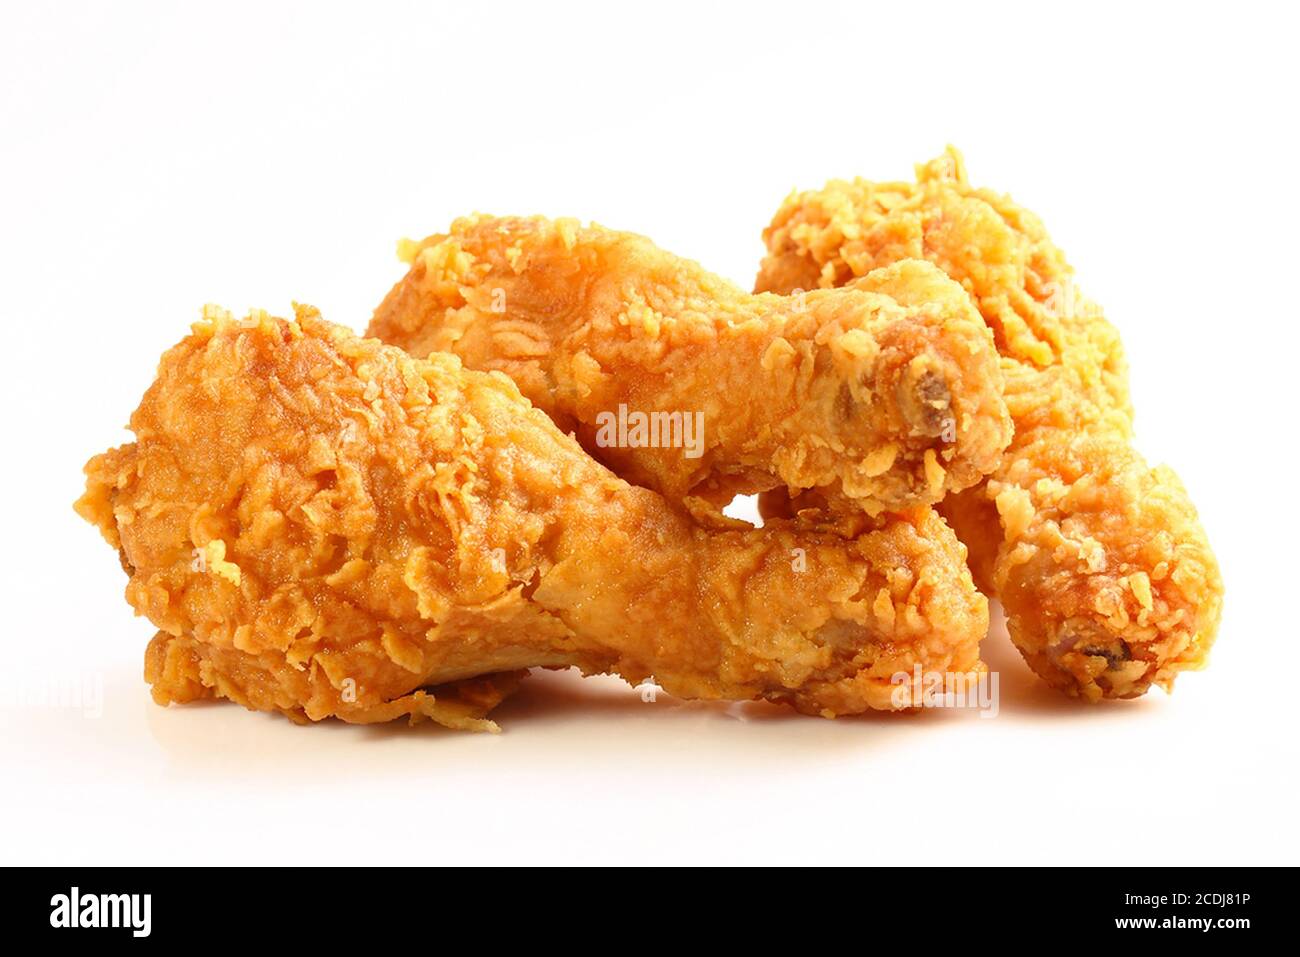 hot and crispy fried chicken legs isolated on a white background Stock Photo